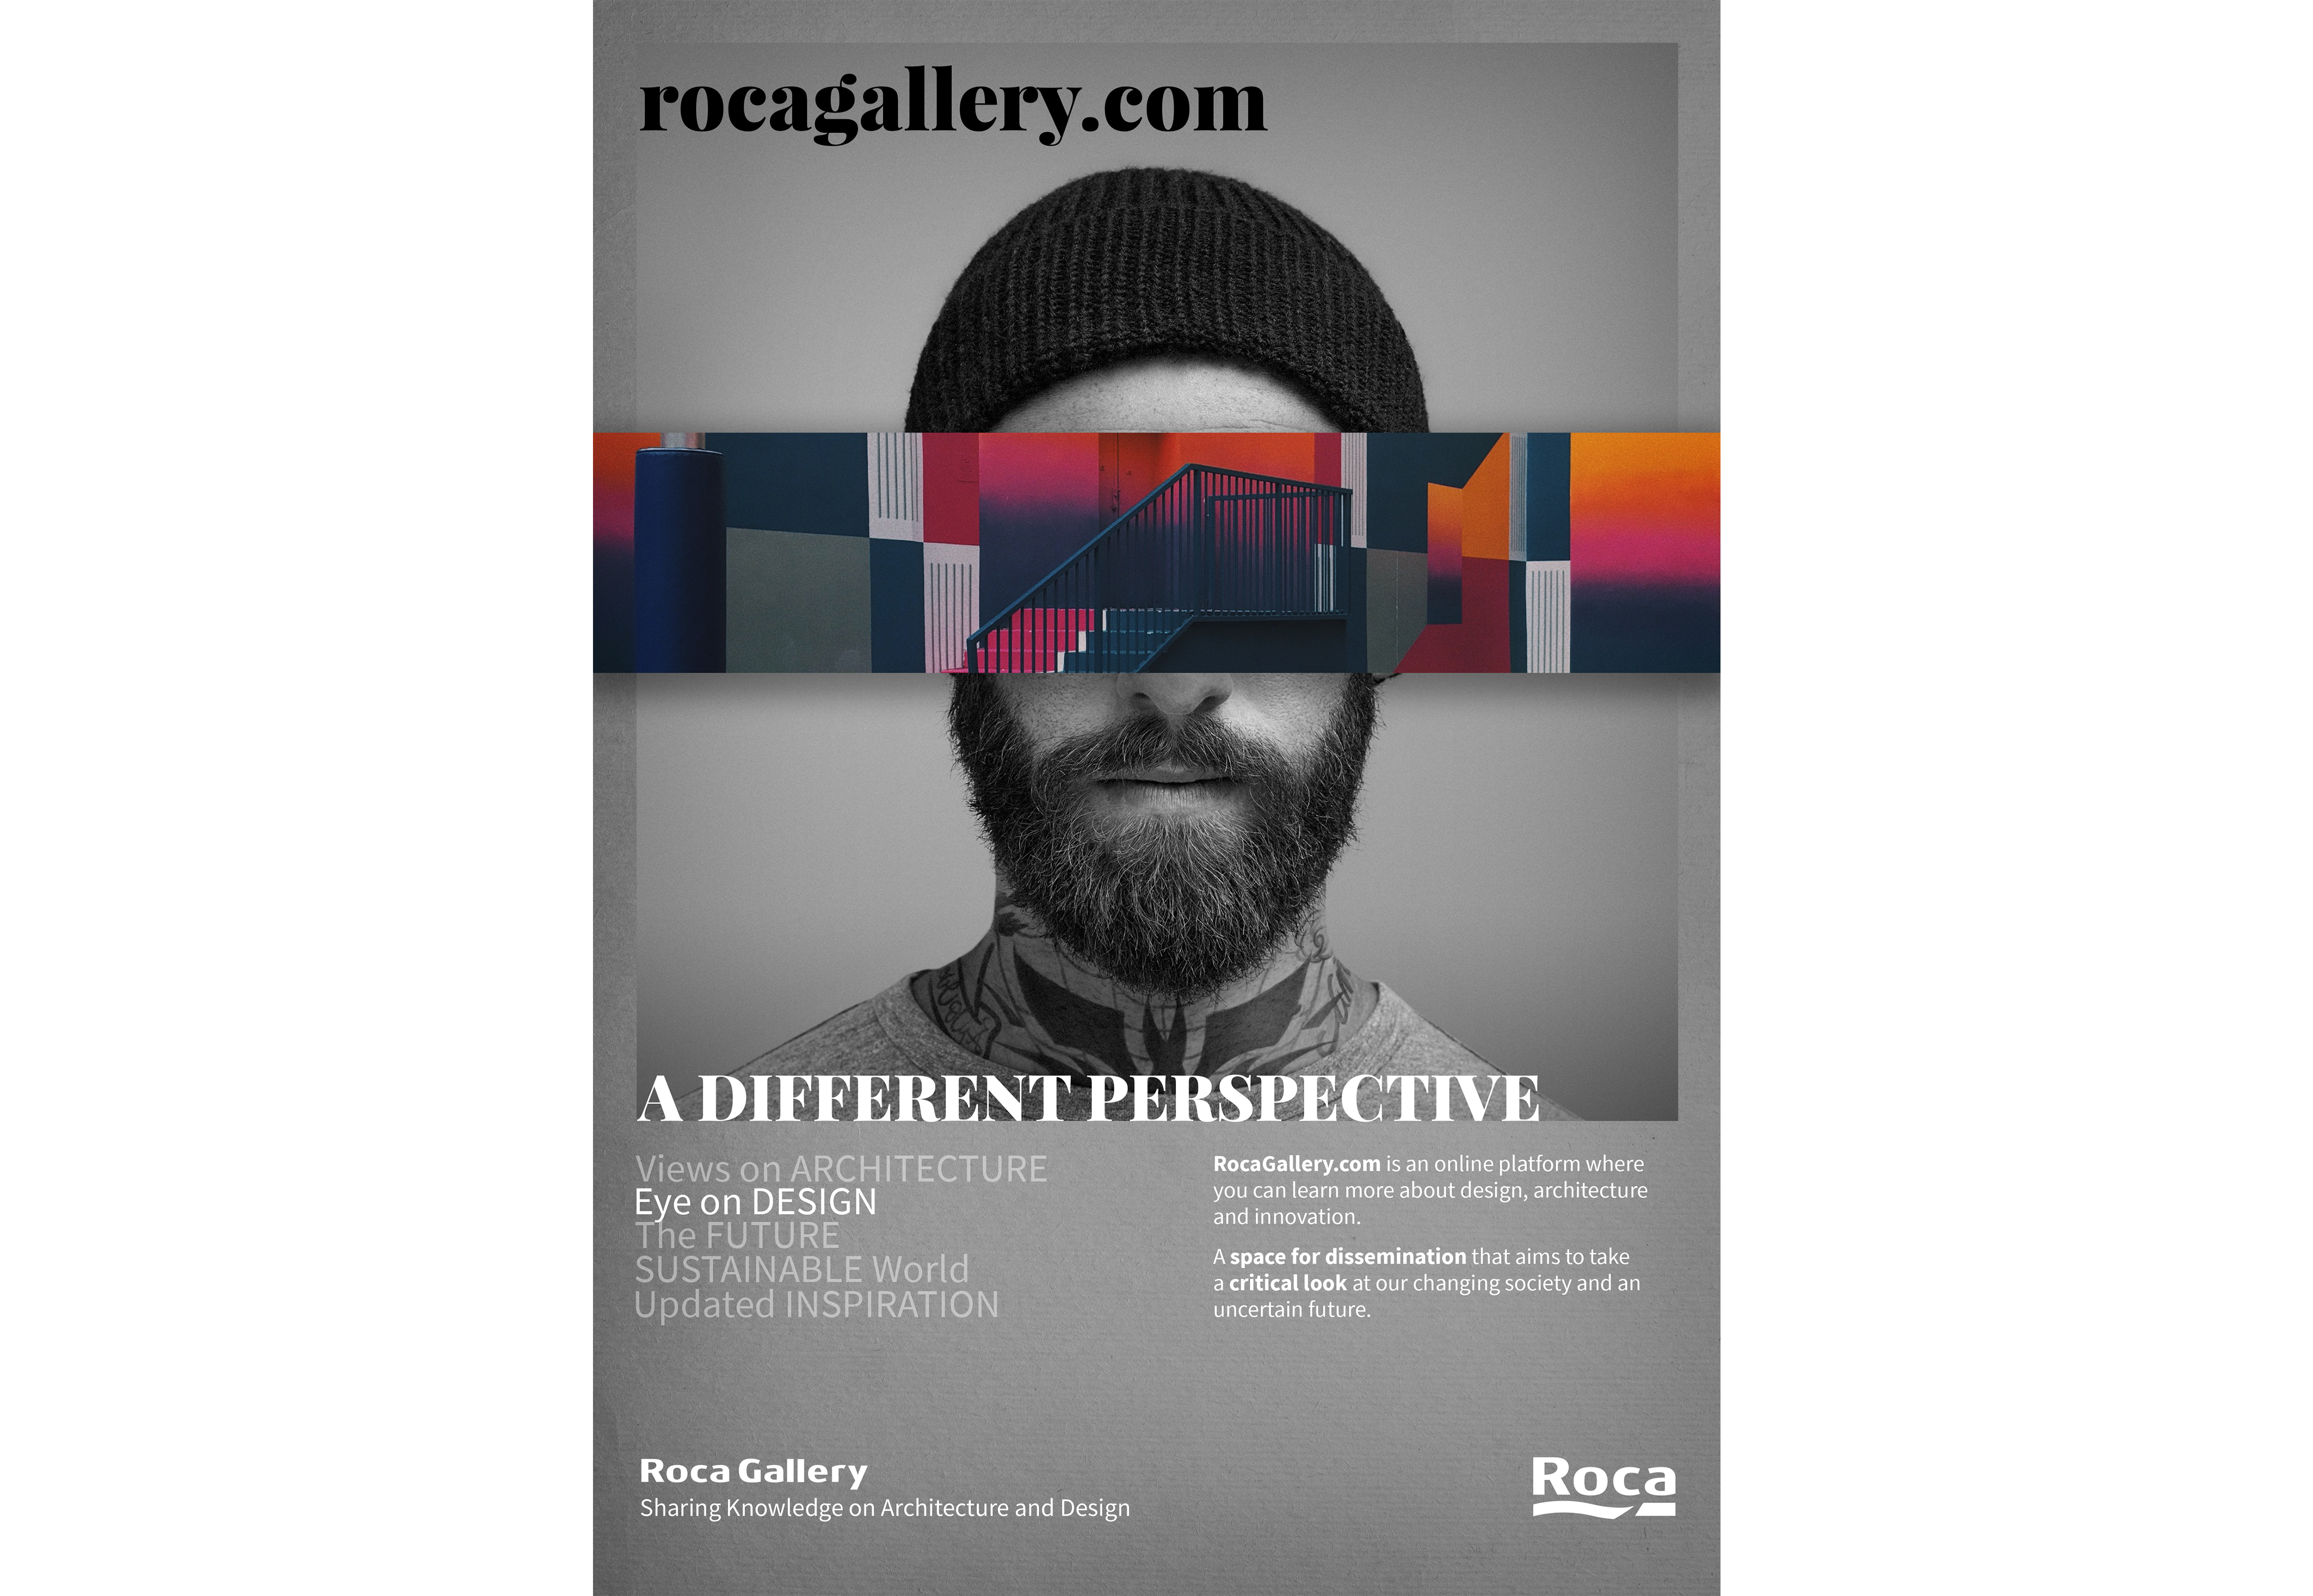 Roca Gallery | A different perspective